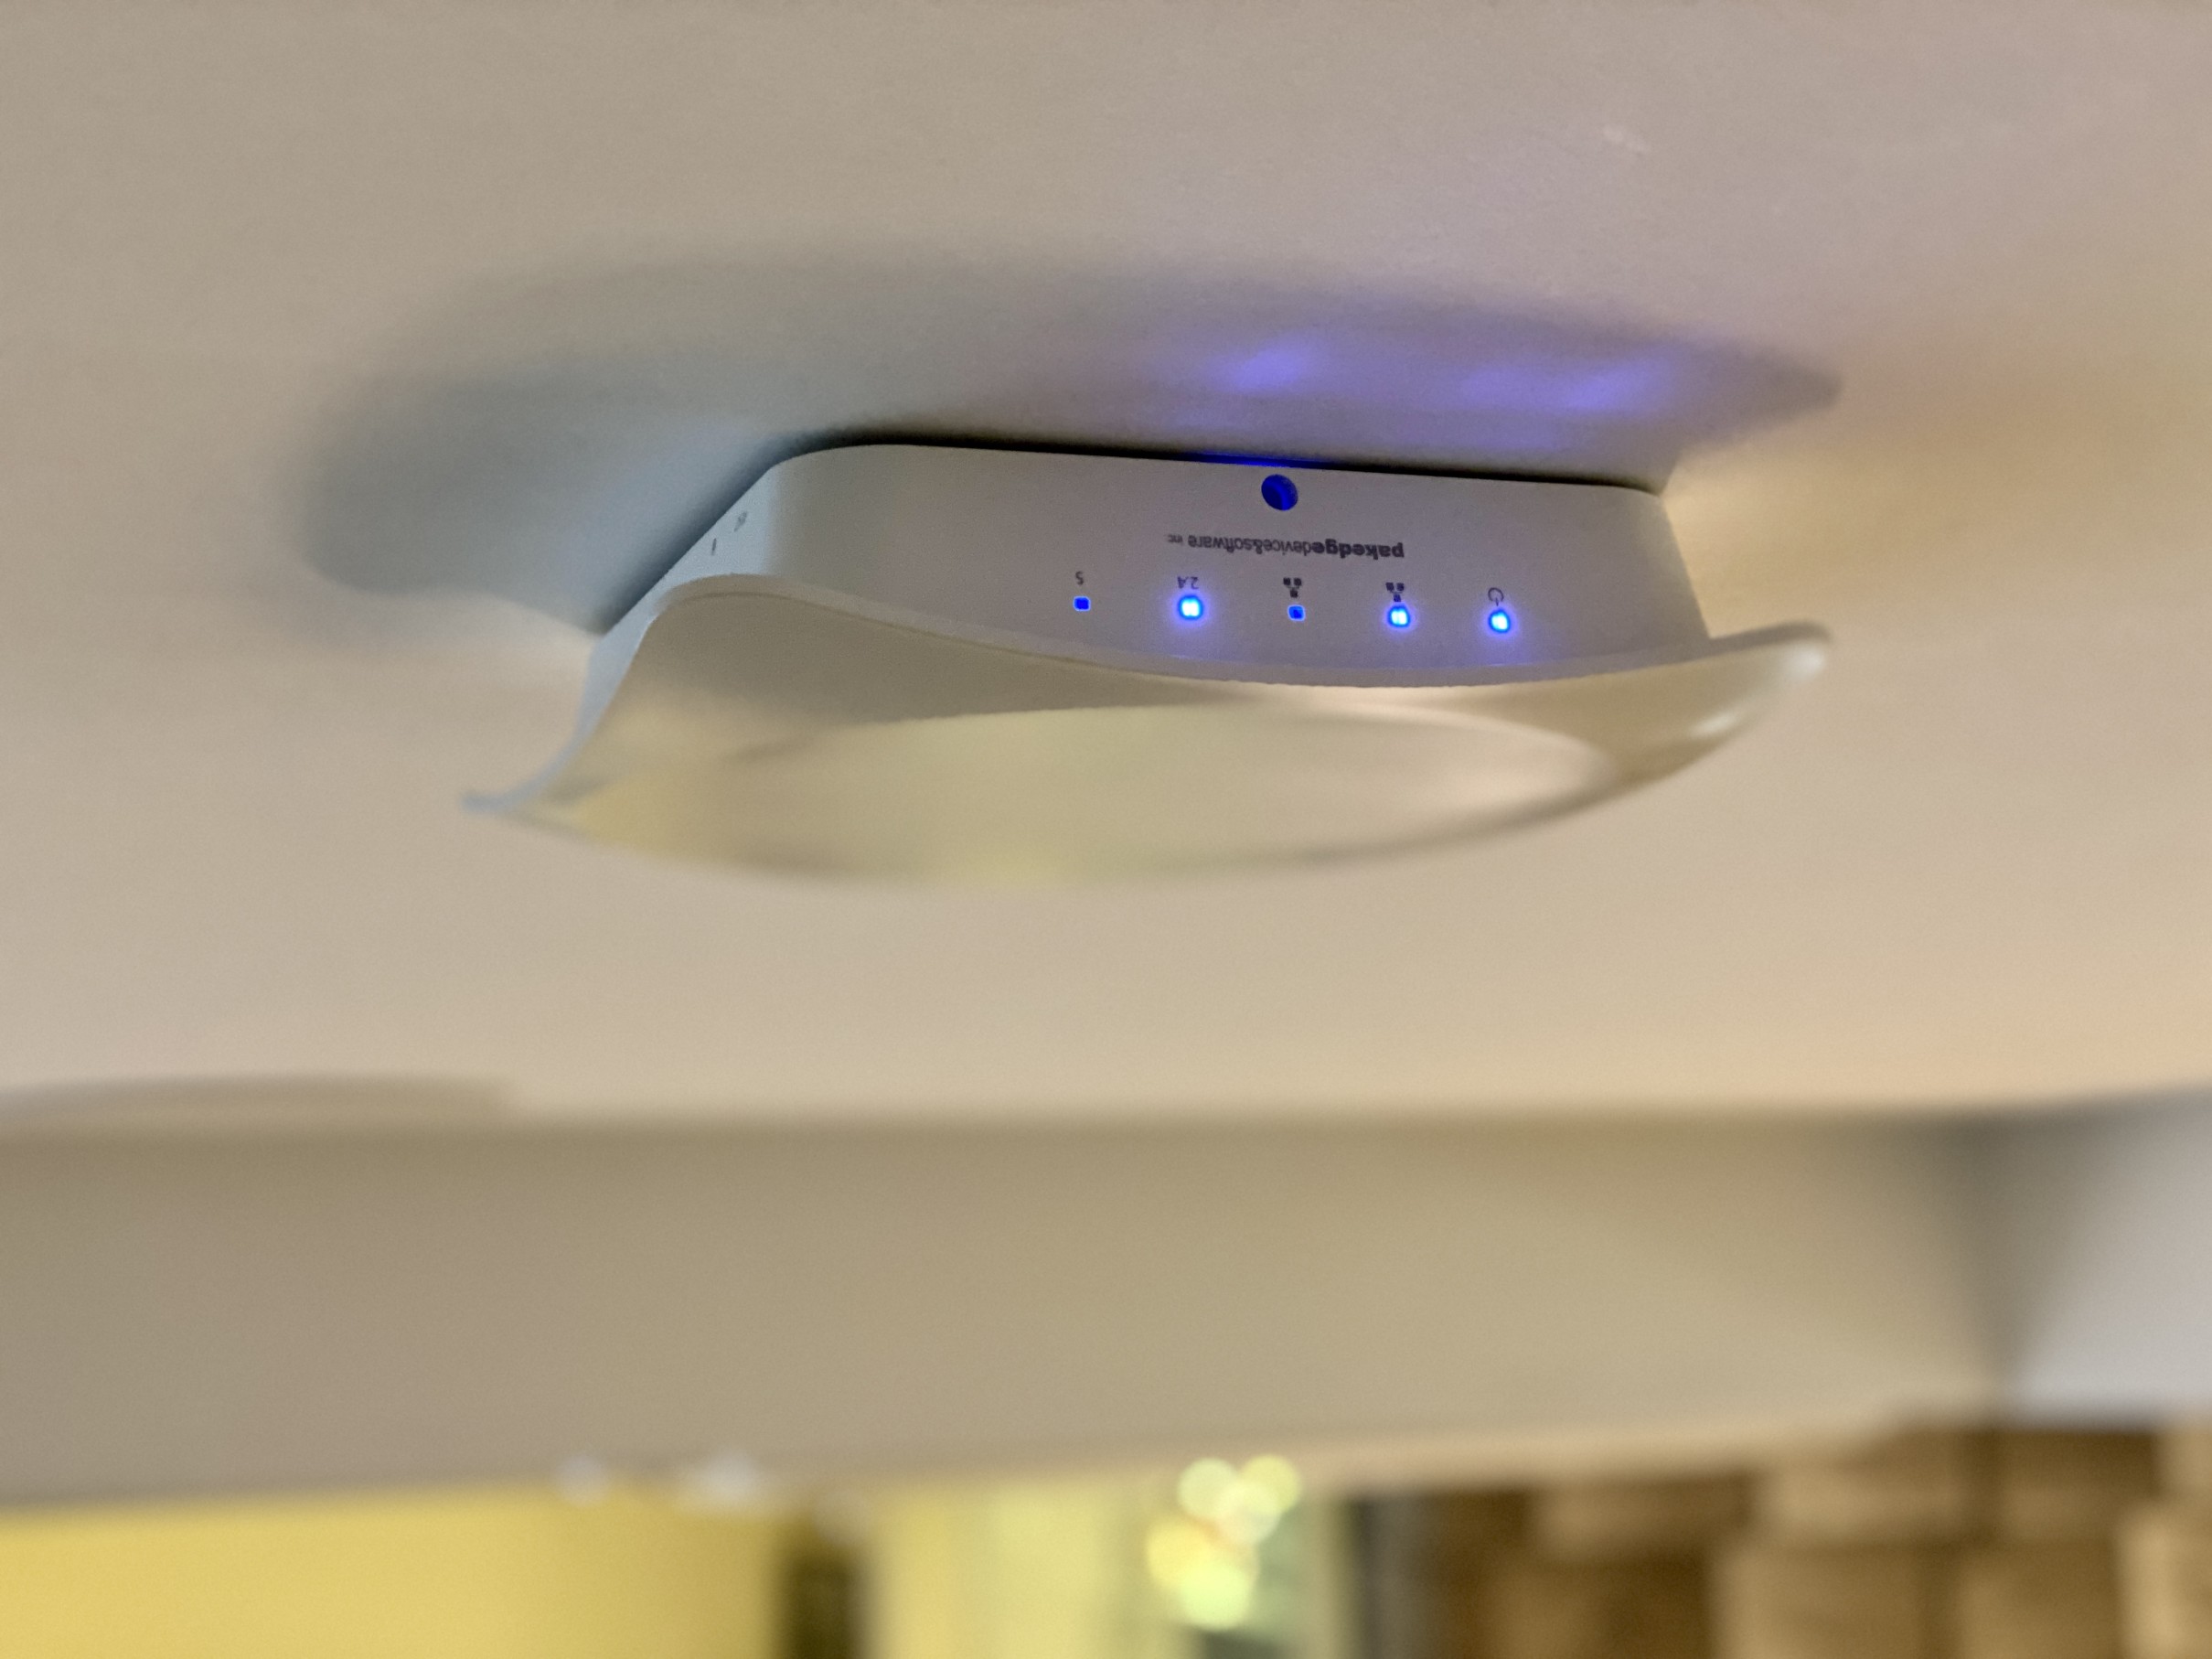 Network access point attached to ceiling